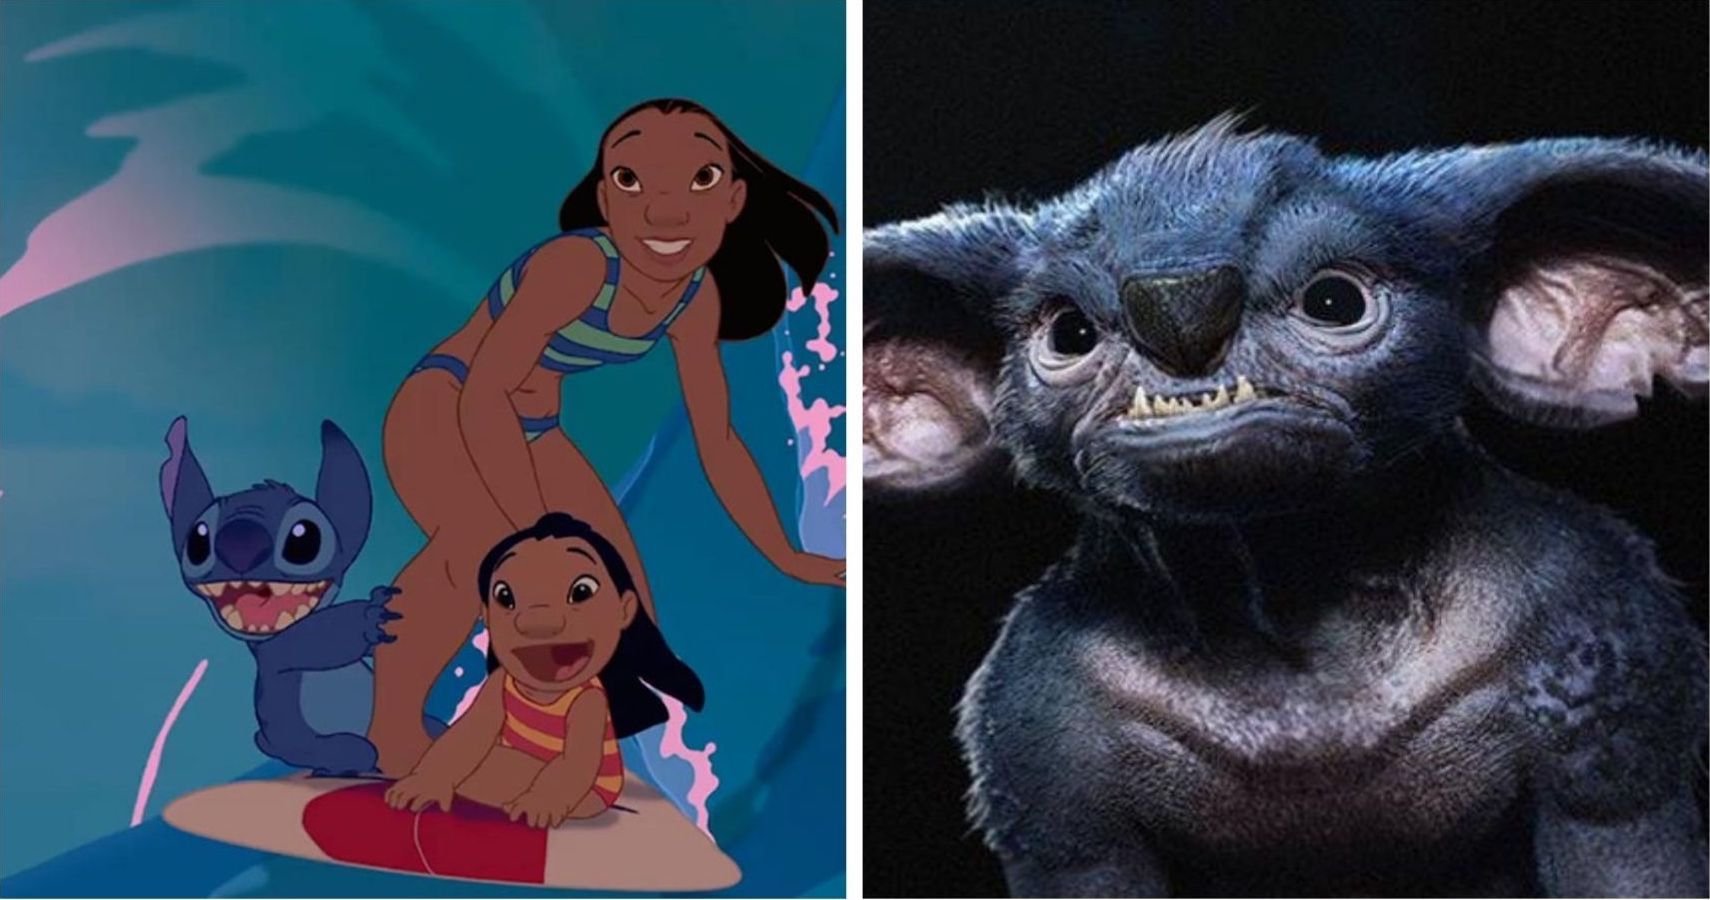 https://static1.srcdn.com/wordpress/wp-content/uploads/2020/08/CS-Live-Action-Lilo-amp-Stitch-5-Reasons-To-Be-Excited-5-Reasons-Disney-Should-Drop-The-Project-Featured-Image.jpg